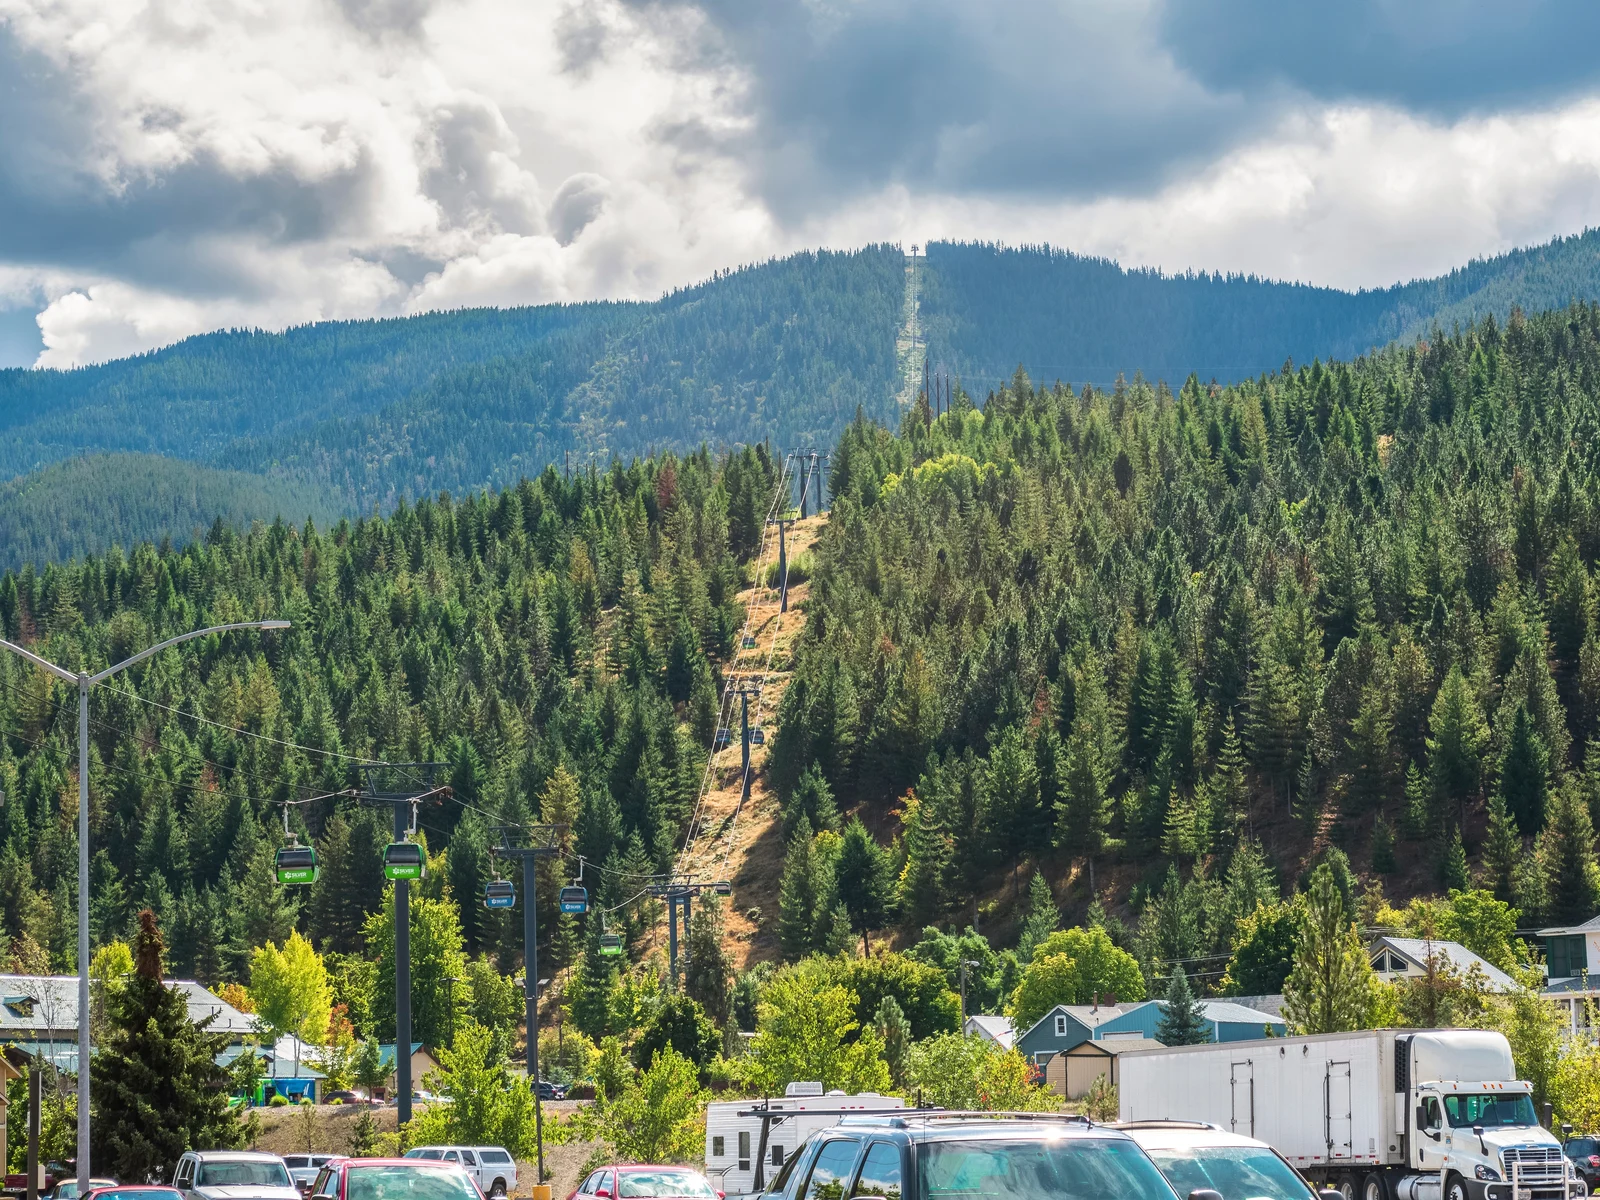 Cars parked at the foot of the Silver Mountain Resort and a ski lift gondola going up the mountain peak on a summer day, one of the best things to see in Idaho